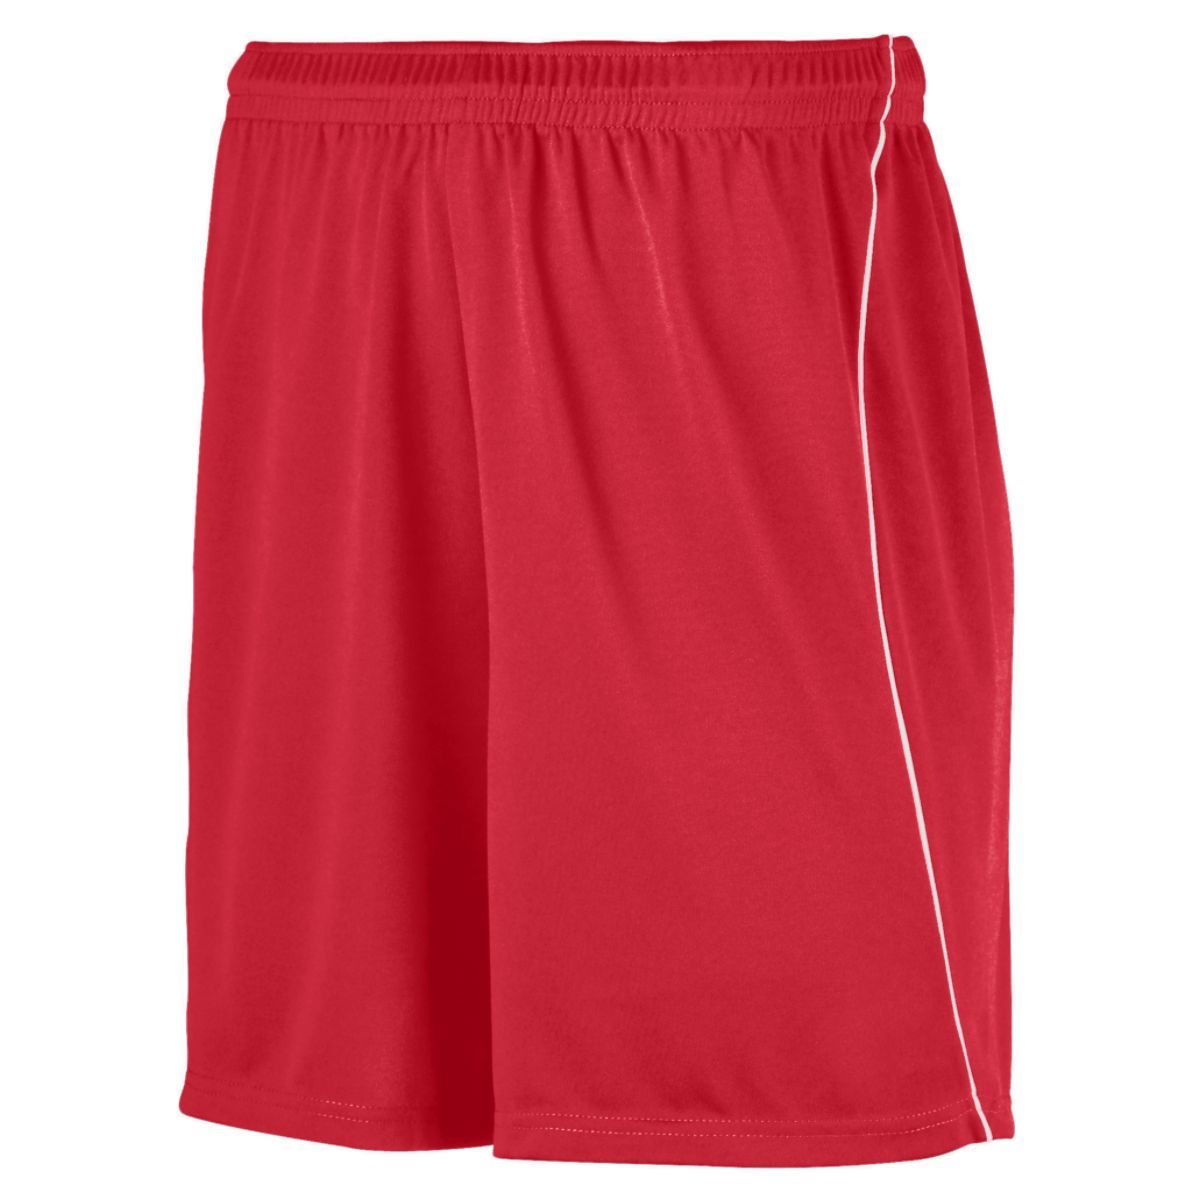 Augusta Sportswear Youth Wicking Soccer Shorts With Piping in Red/White  -Part of the Youth, Youth-Shorts, Augusta-Products, Soccer, All-Sports-1 product lines at KanaleyCreations.com